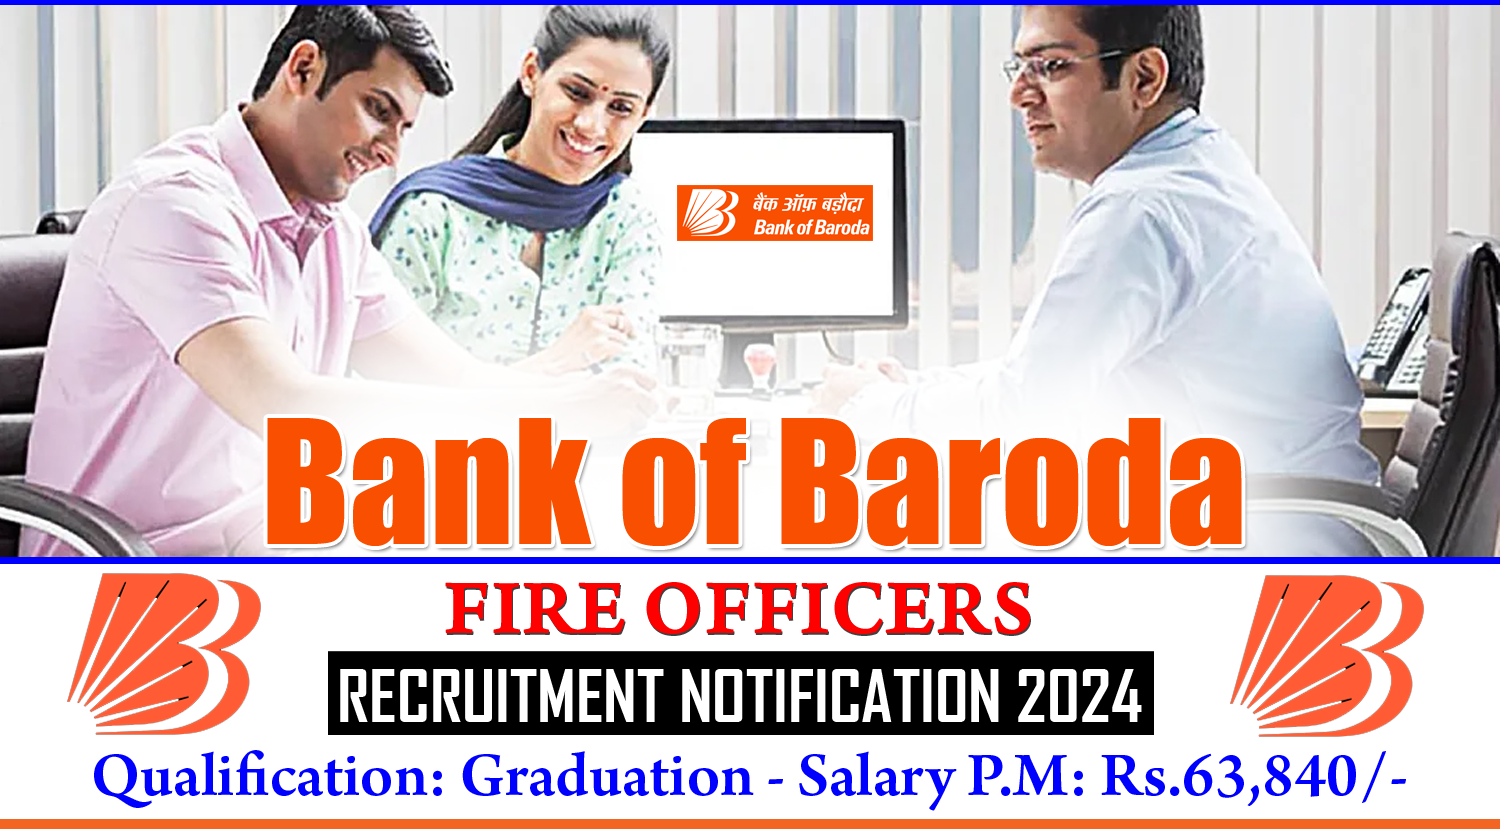 Bank of Baroda Fire Officer Recruitment Notification Out 2024